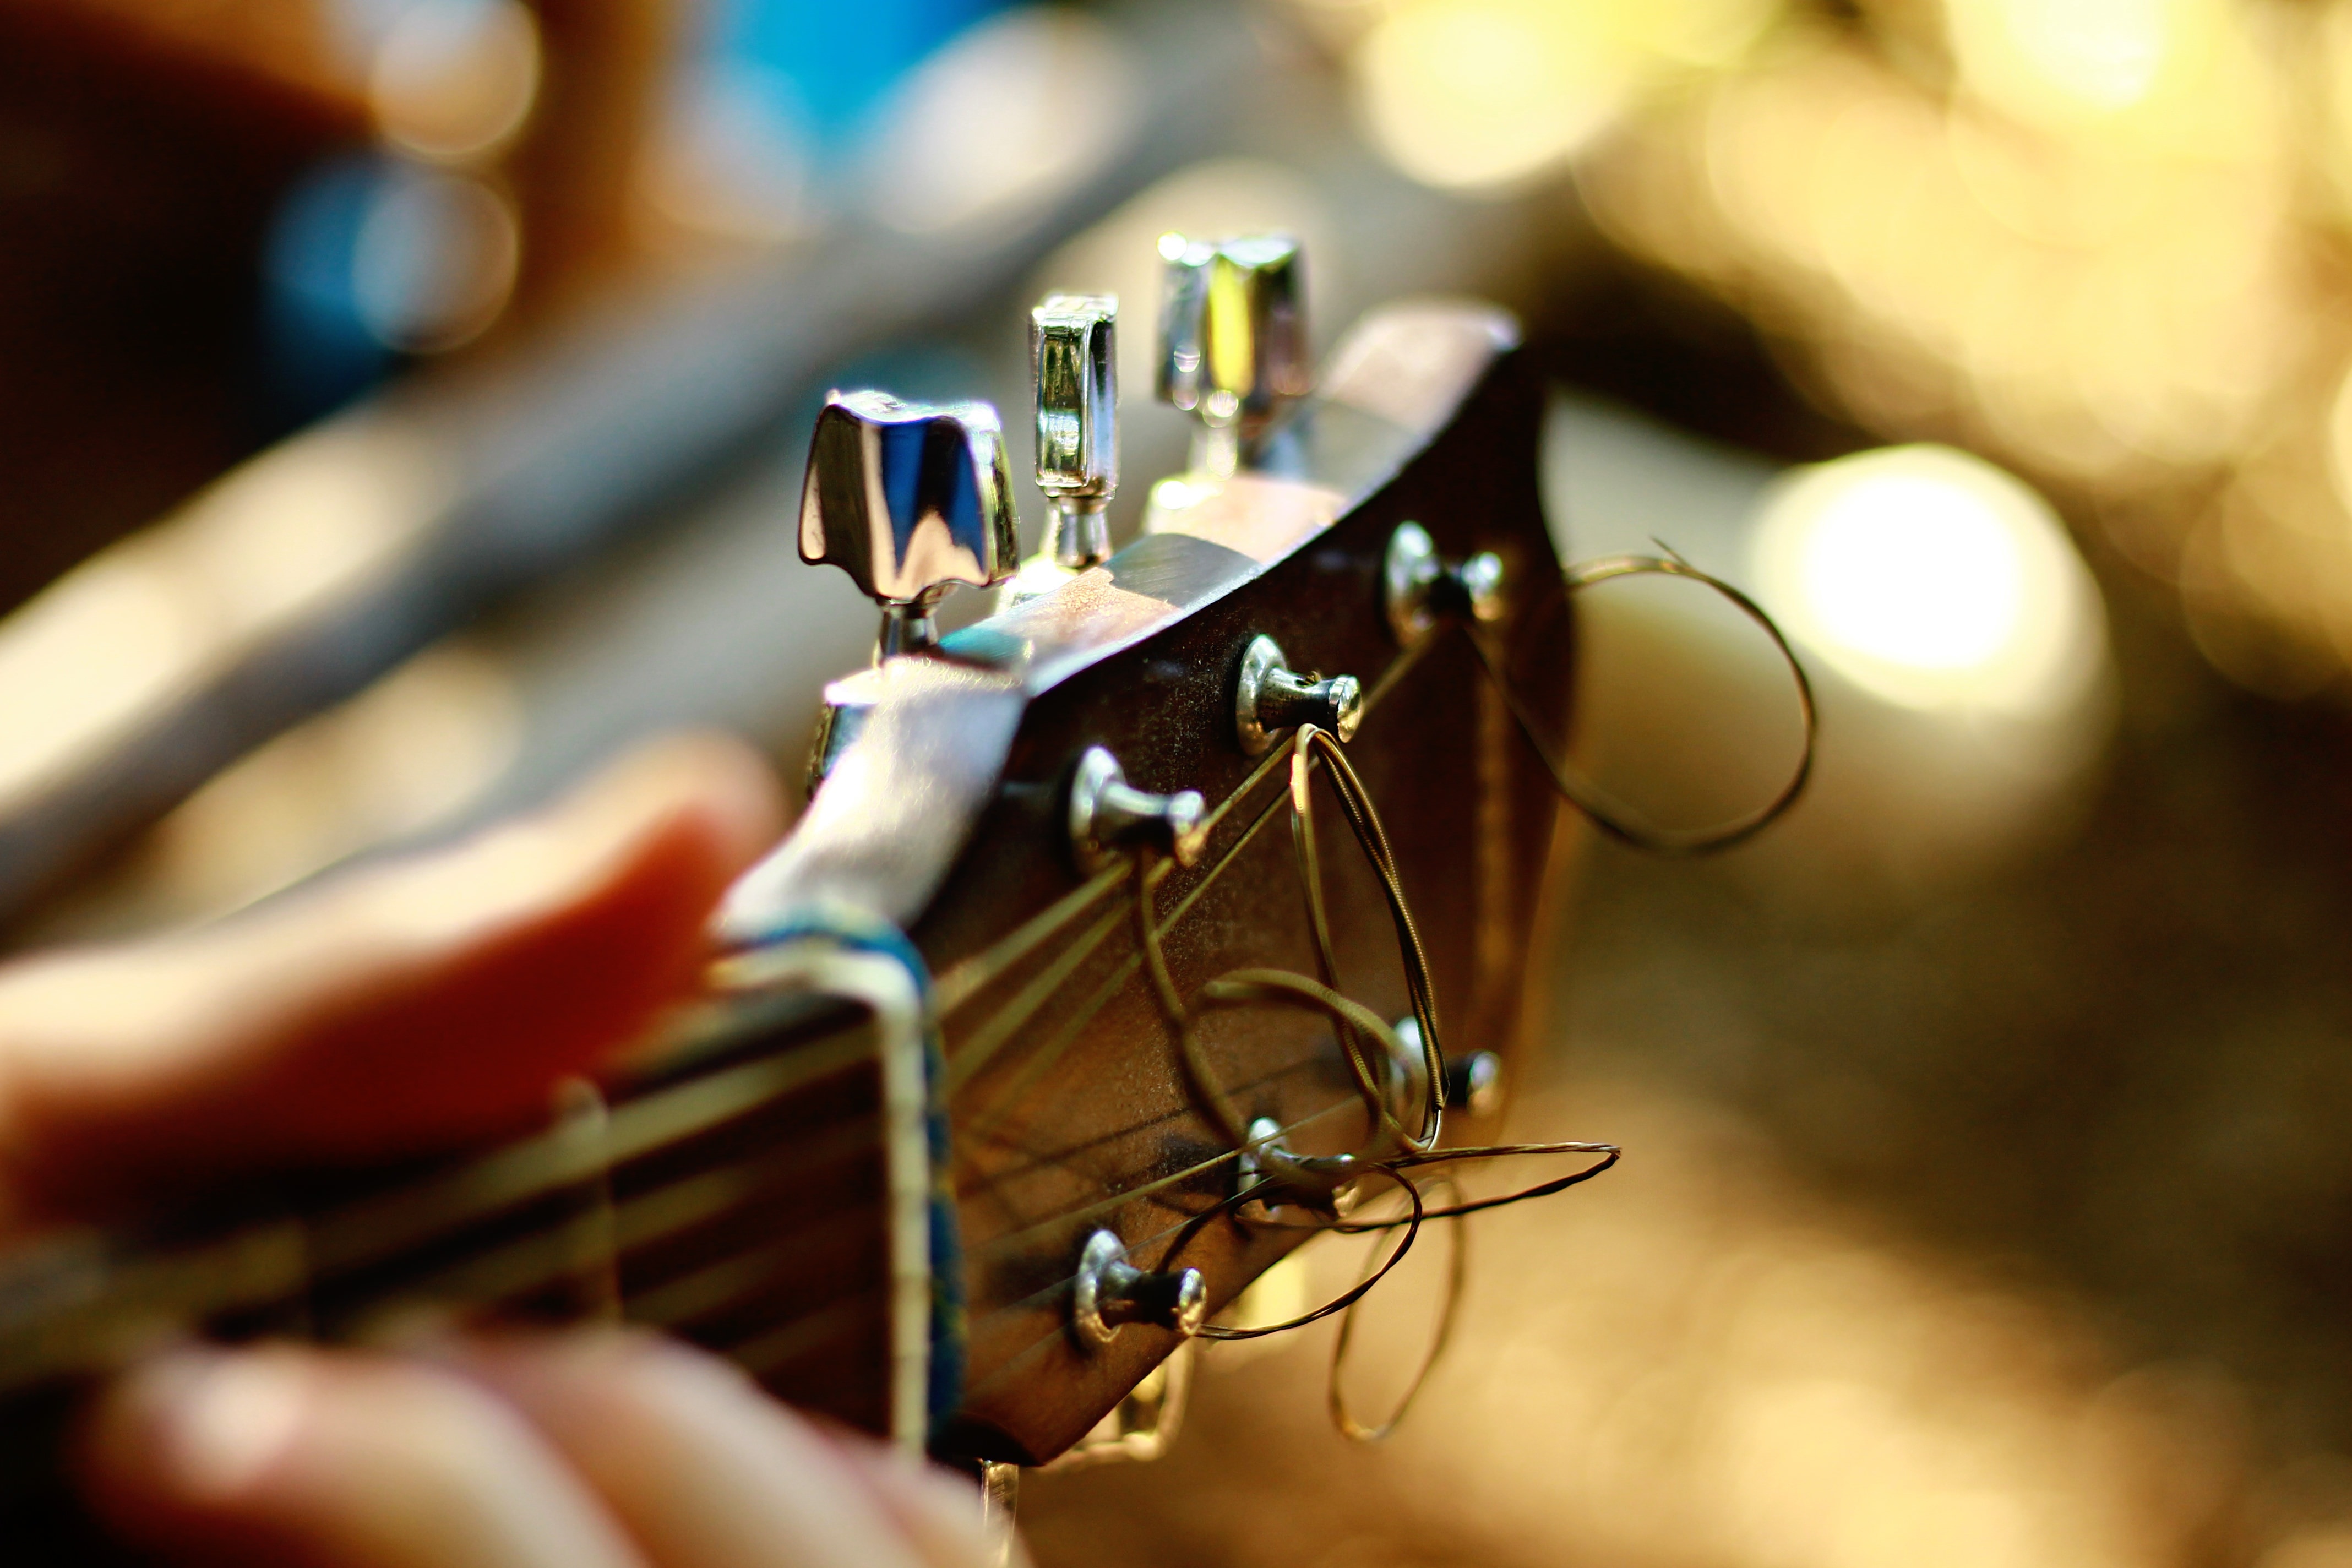 closed up photography of guitar headstock